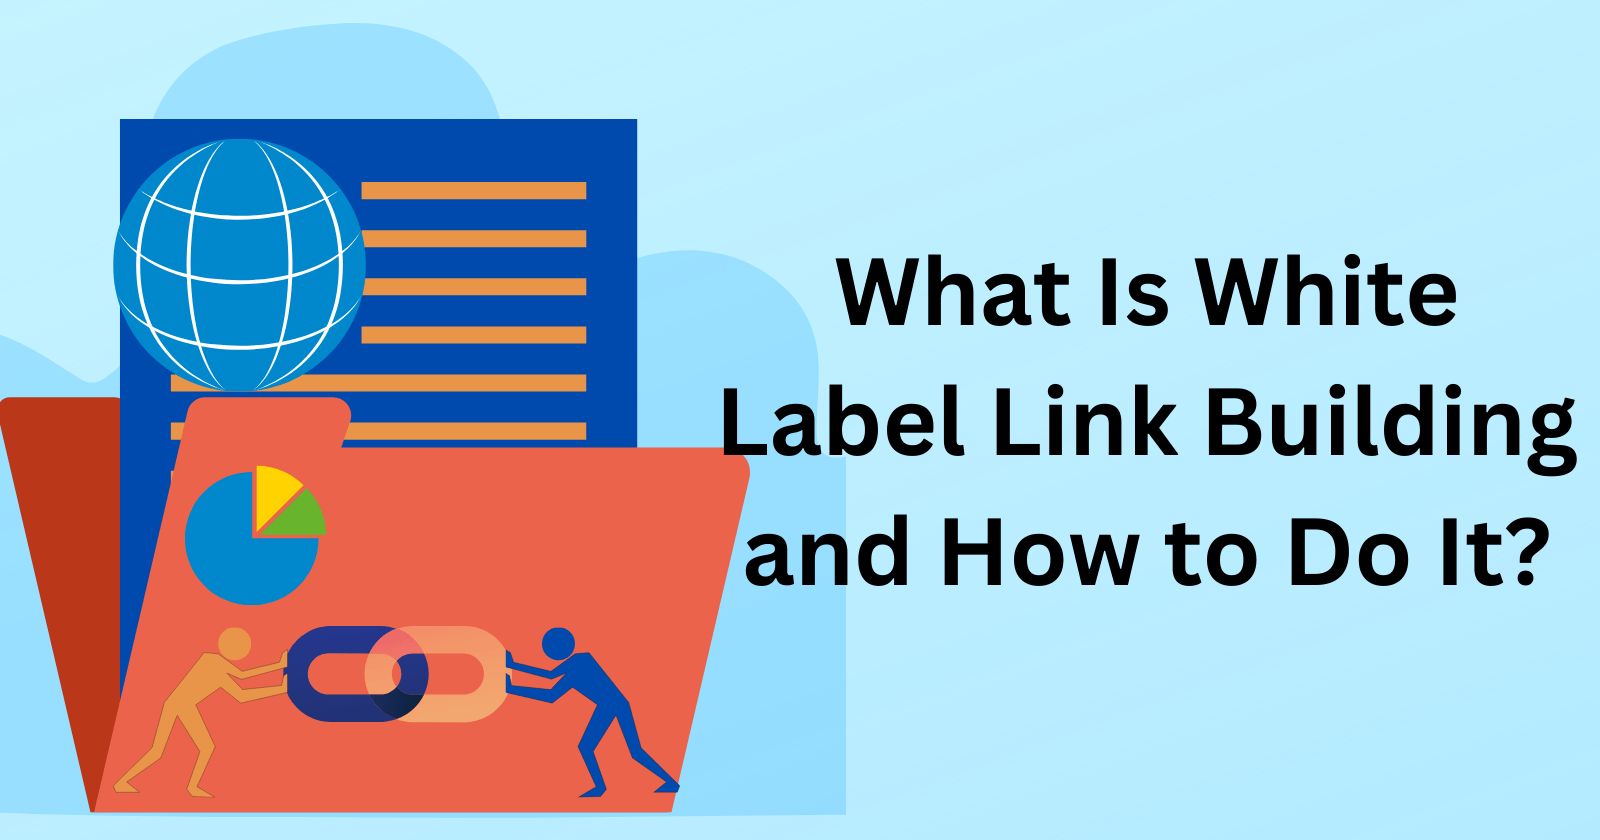 What Is White Label Link Building